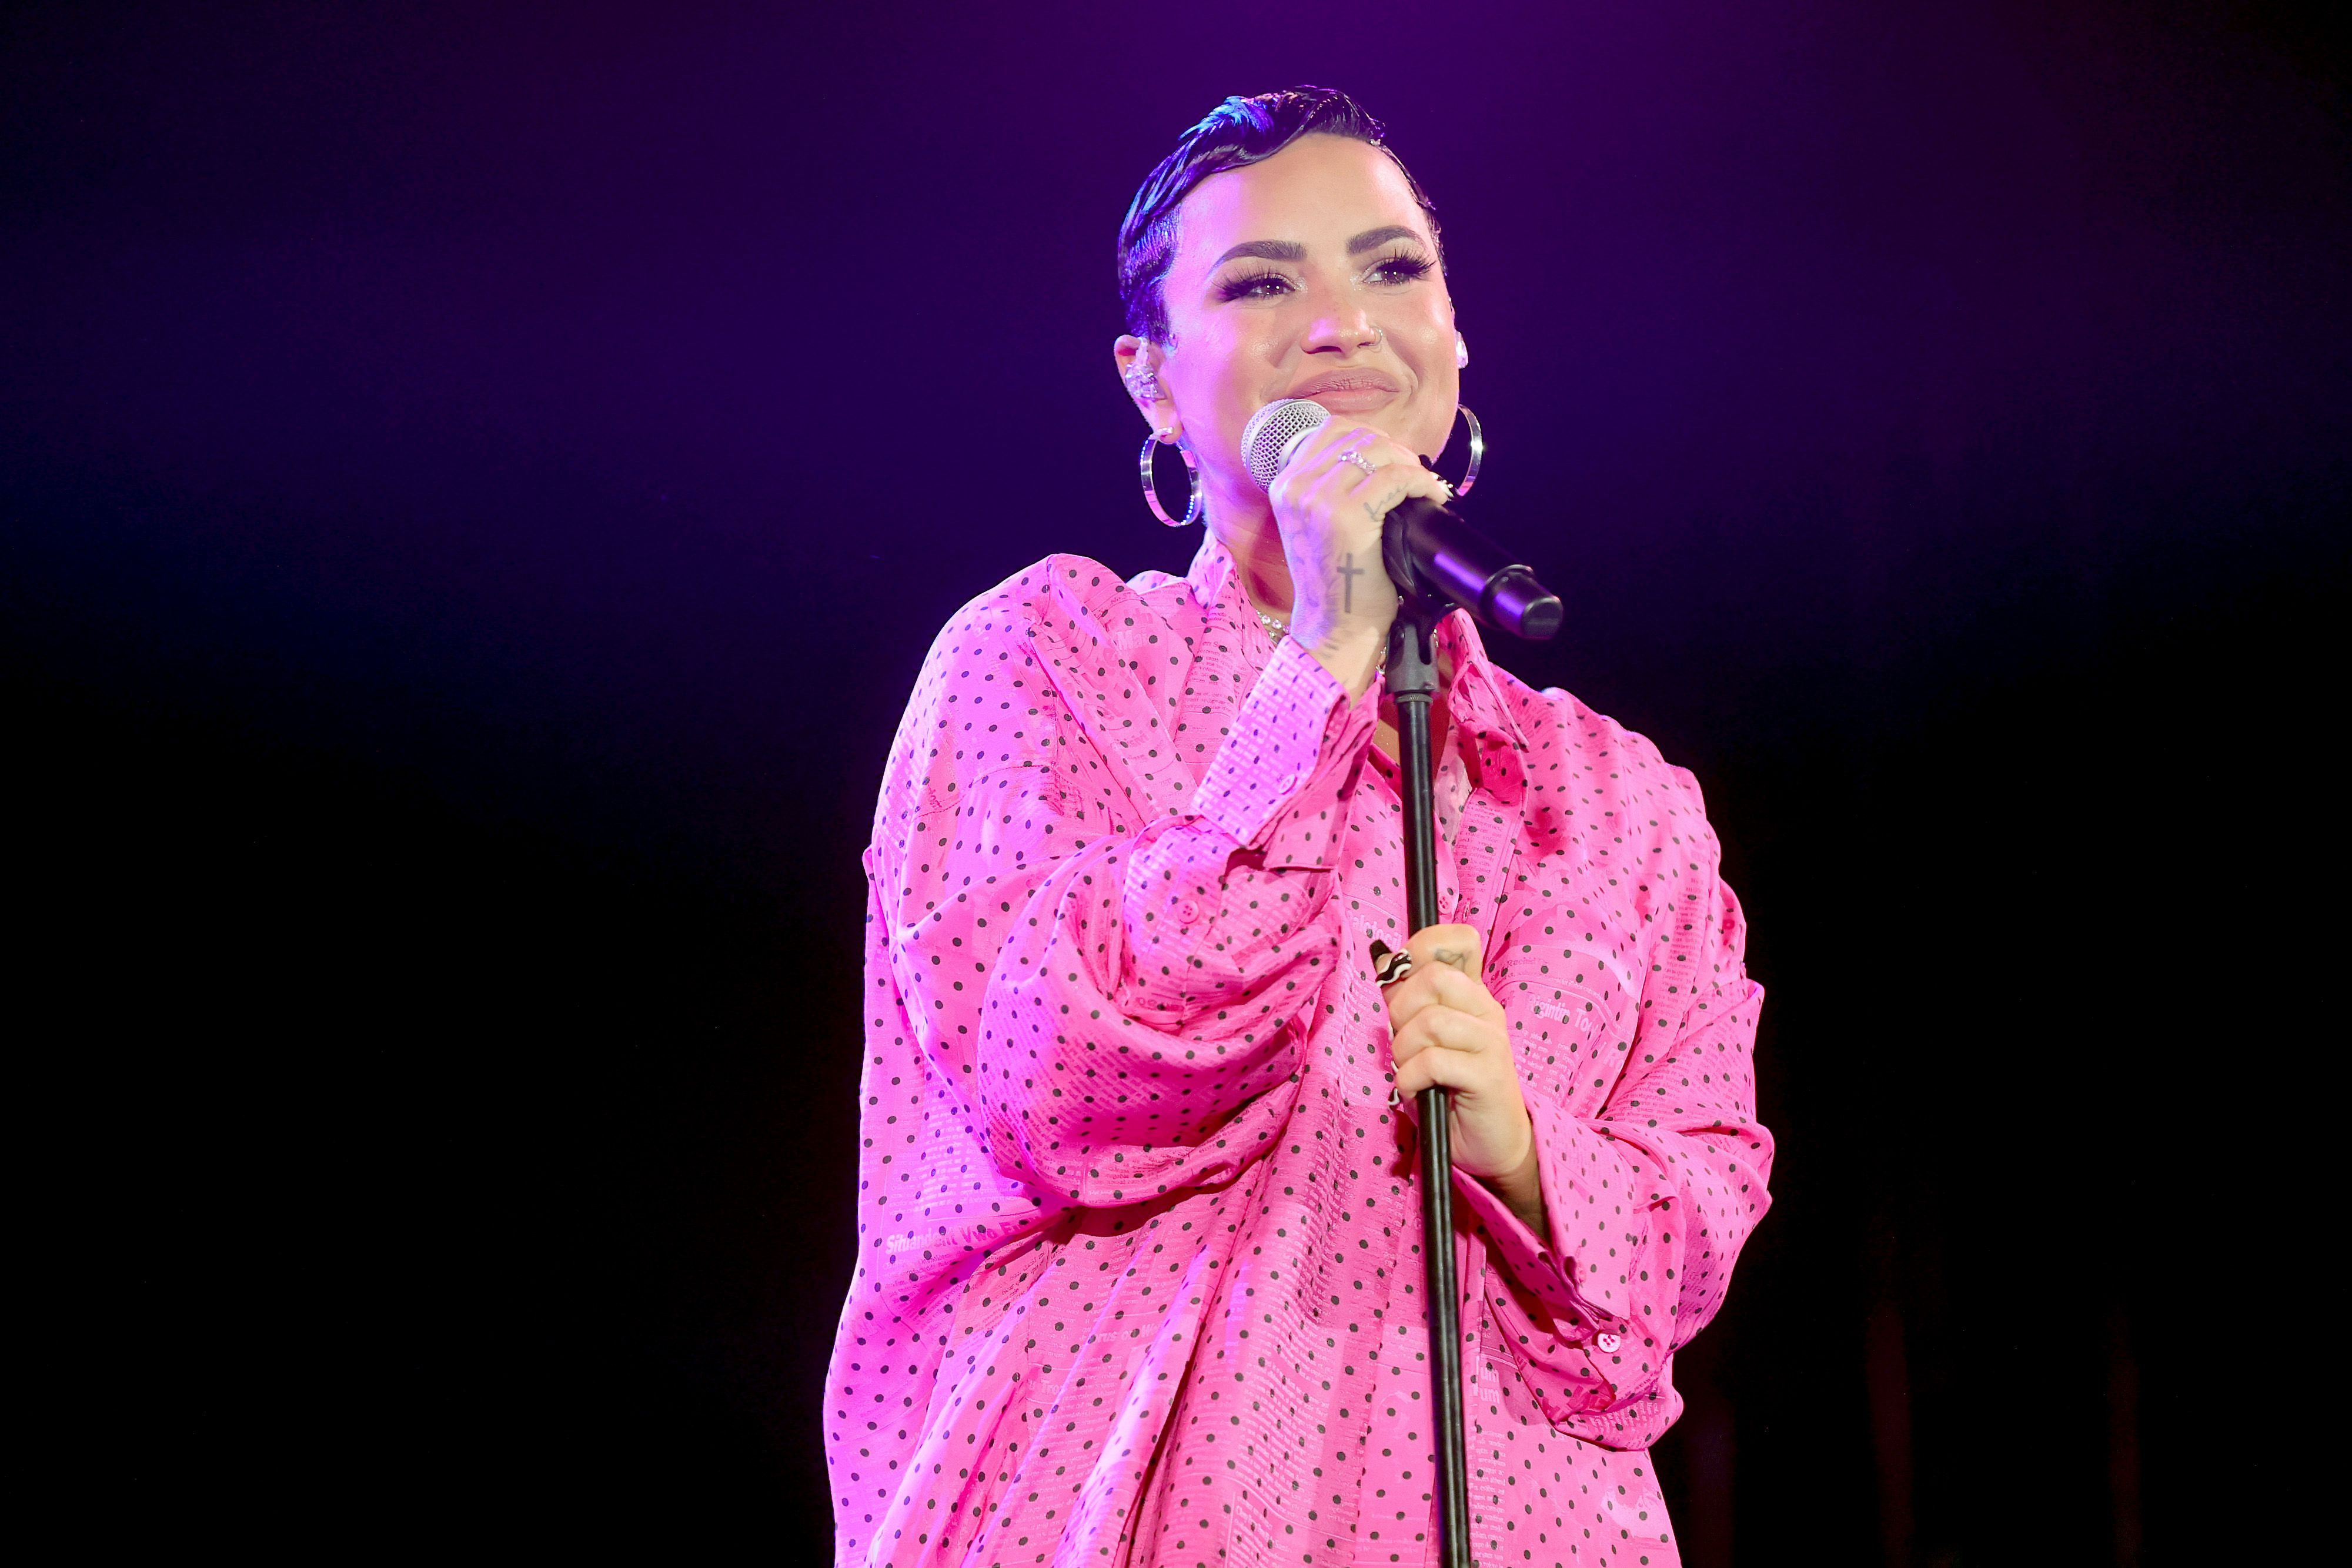 Demi Lovato performs onstage during the OBB Premiere Event for the YouTube Originals Docuseries "Demi Lovato: Dancing With The Devil" at The Beverly Hilton on March 22, 2021 in Beverly Hills, California.